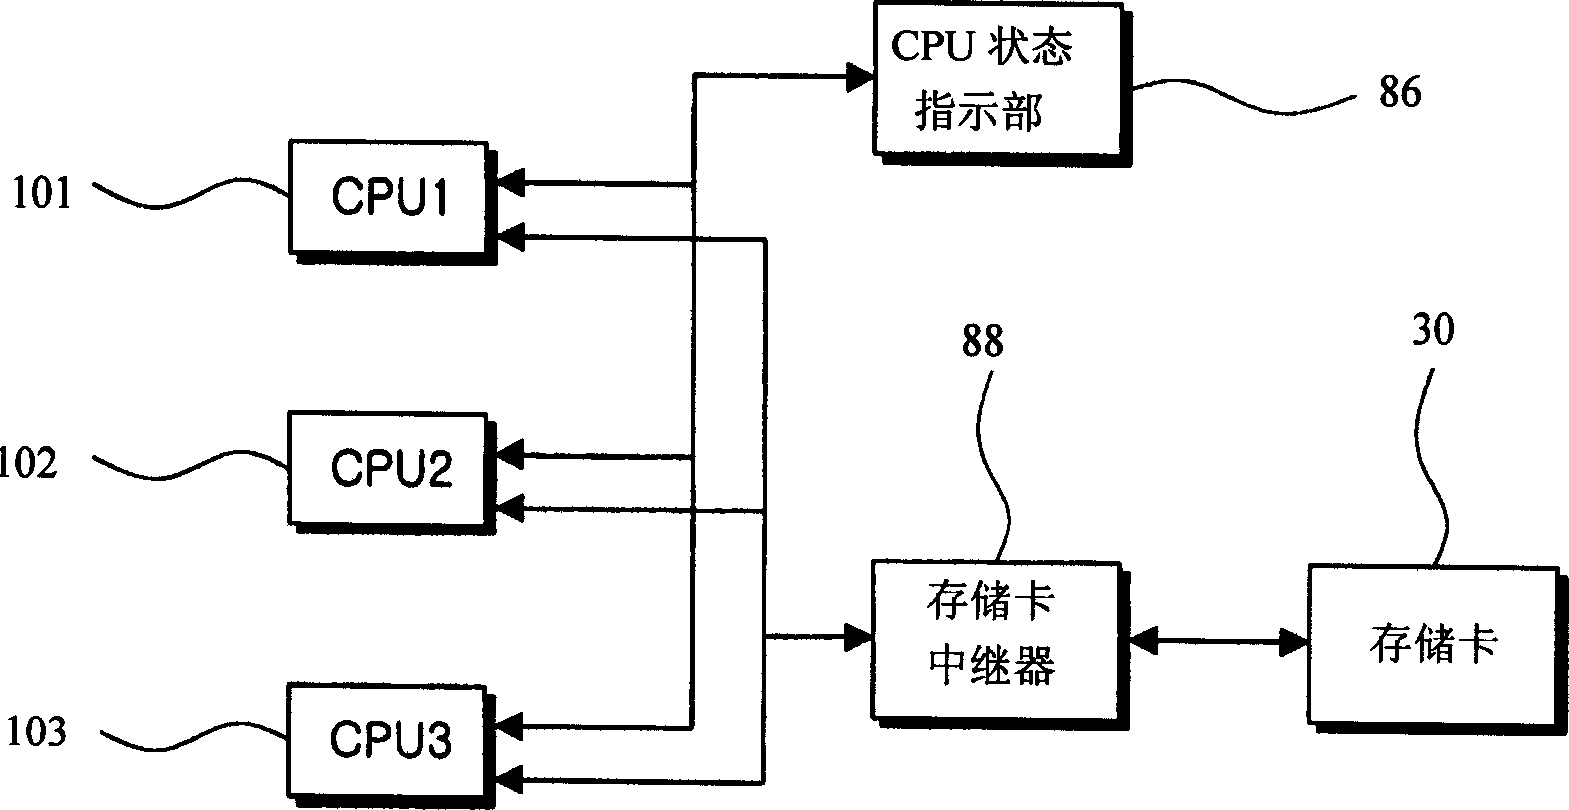 Multiple CPU storage card sharing device